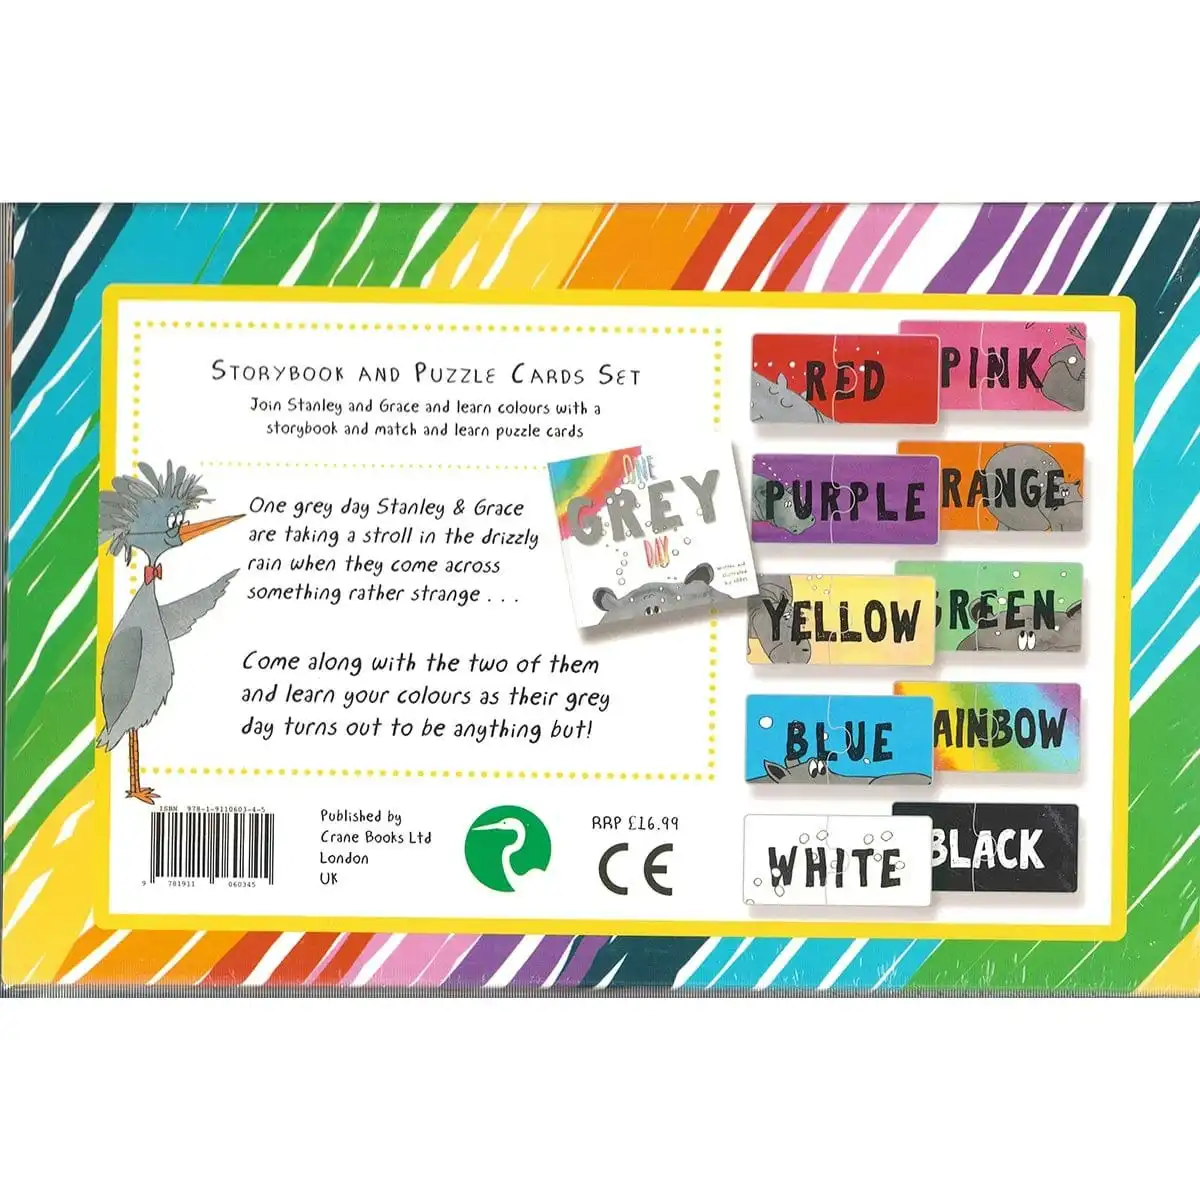 Match & Learn Colours - Storybook and Puzzle Cards Set